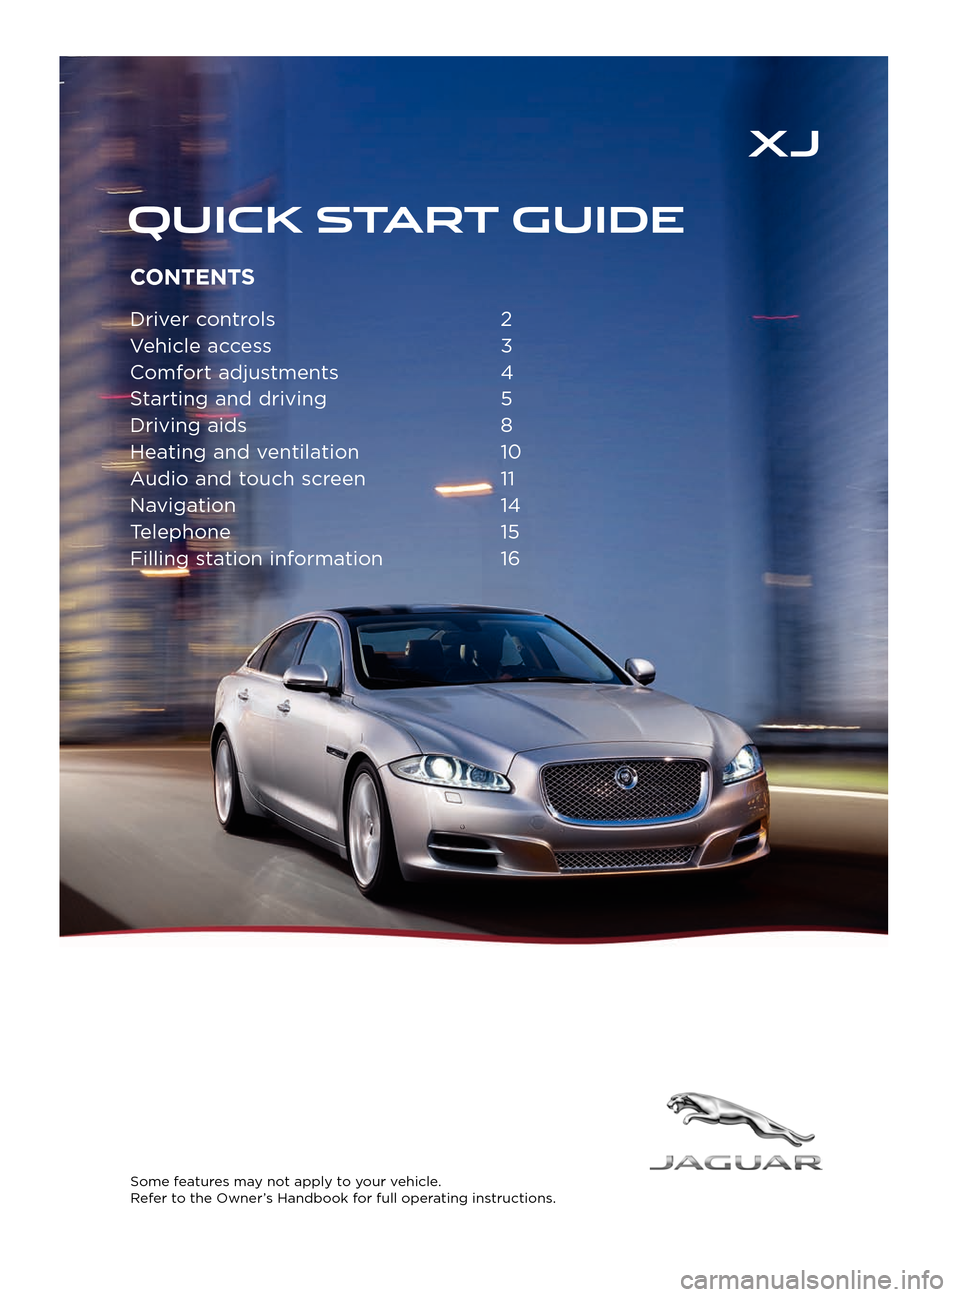 JAGUAR XJ 2014 X351 / 4.G Quick Start Guide CONTENTS
Driver controls 2
V ehicle access  
3
C

omfort adjustments  
4
S

tarting and driving  
5
Driving aids

 
8
Hea

ting and ventilation  
10
A

udio and touch screen  
11
Na

vigation   14
Tel